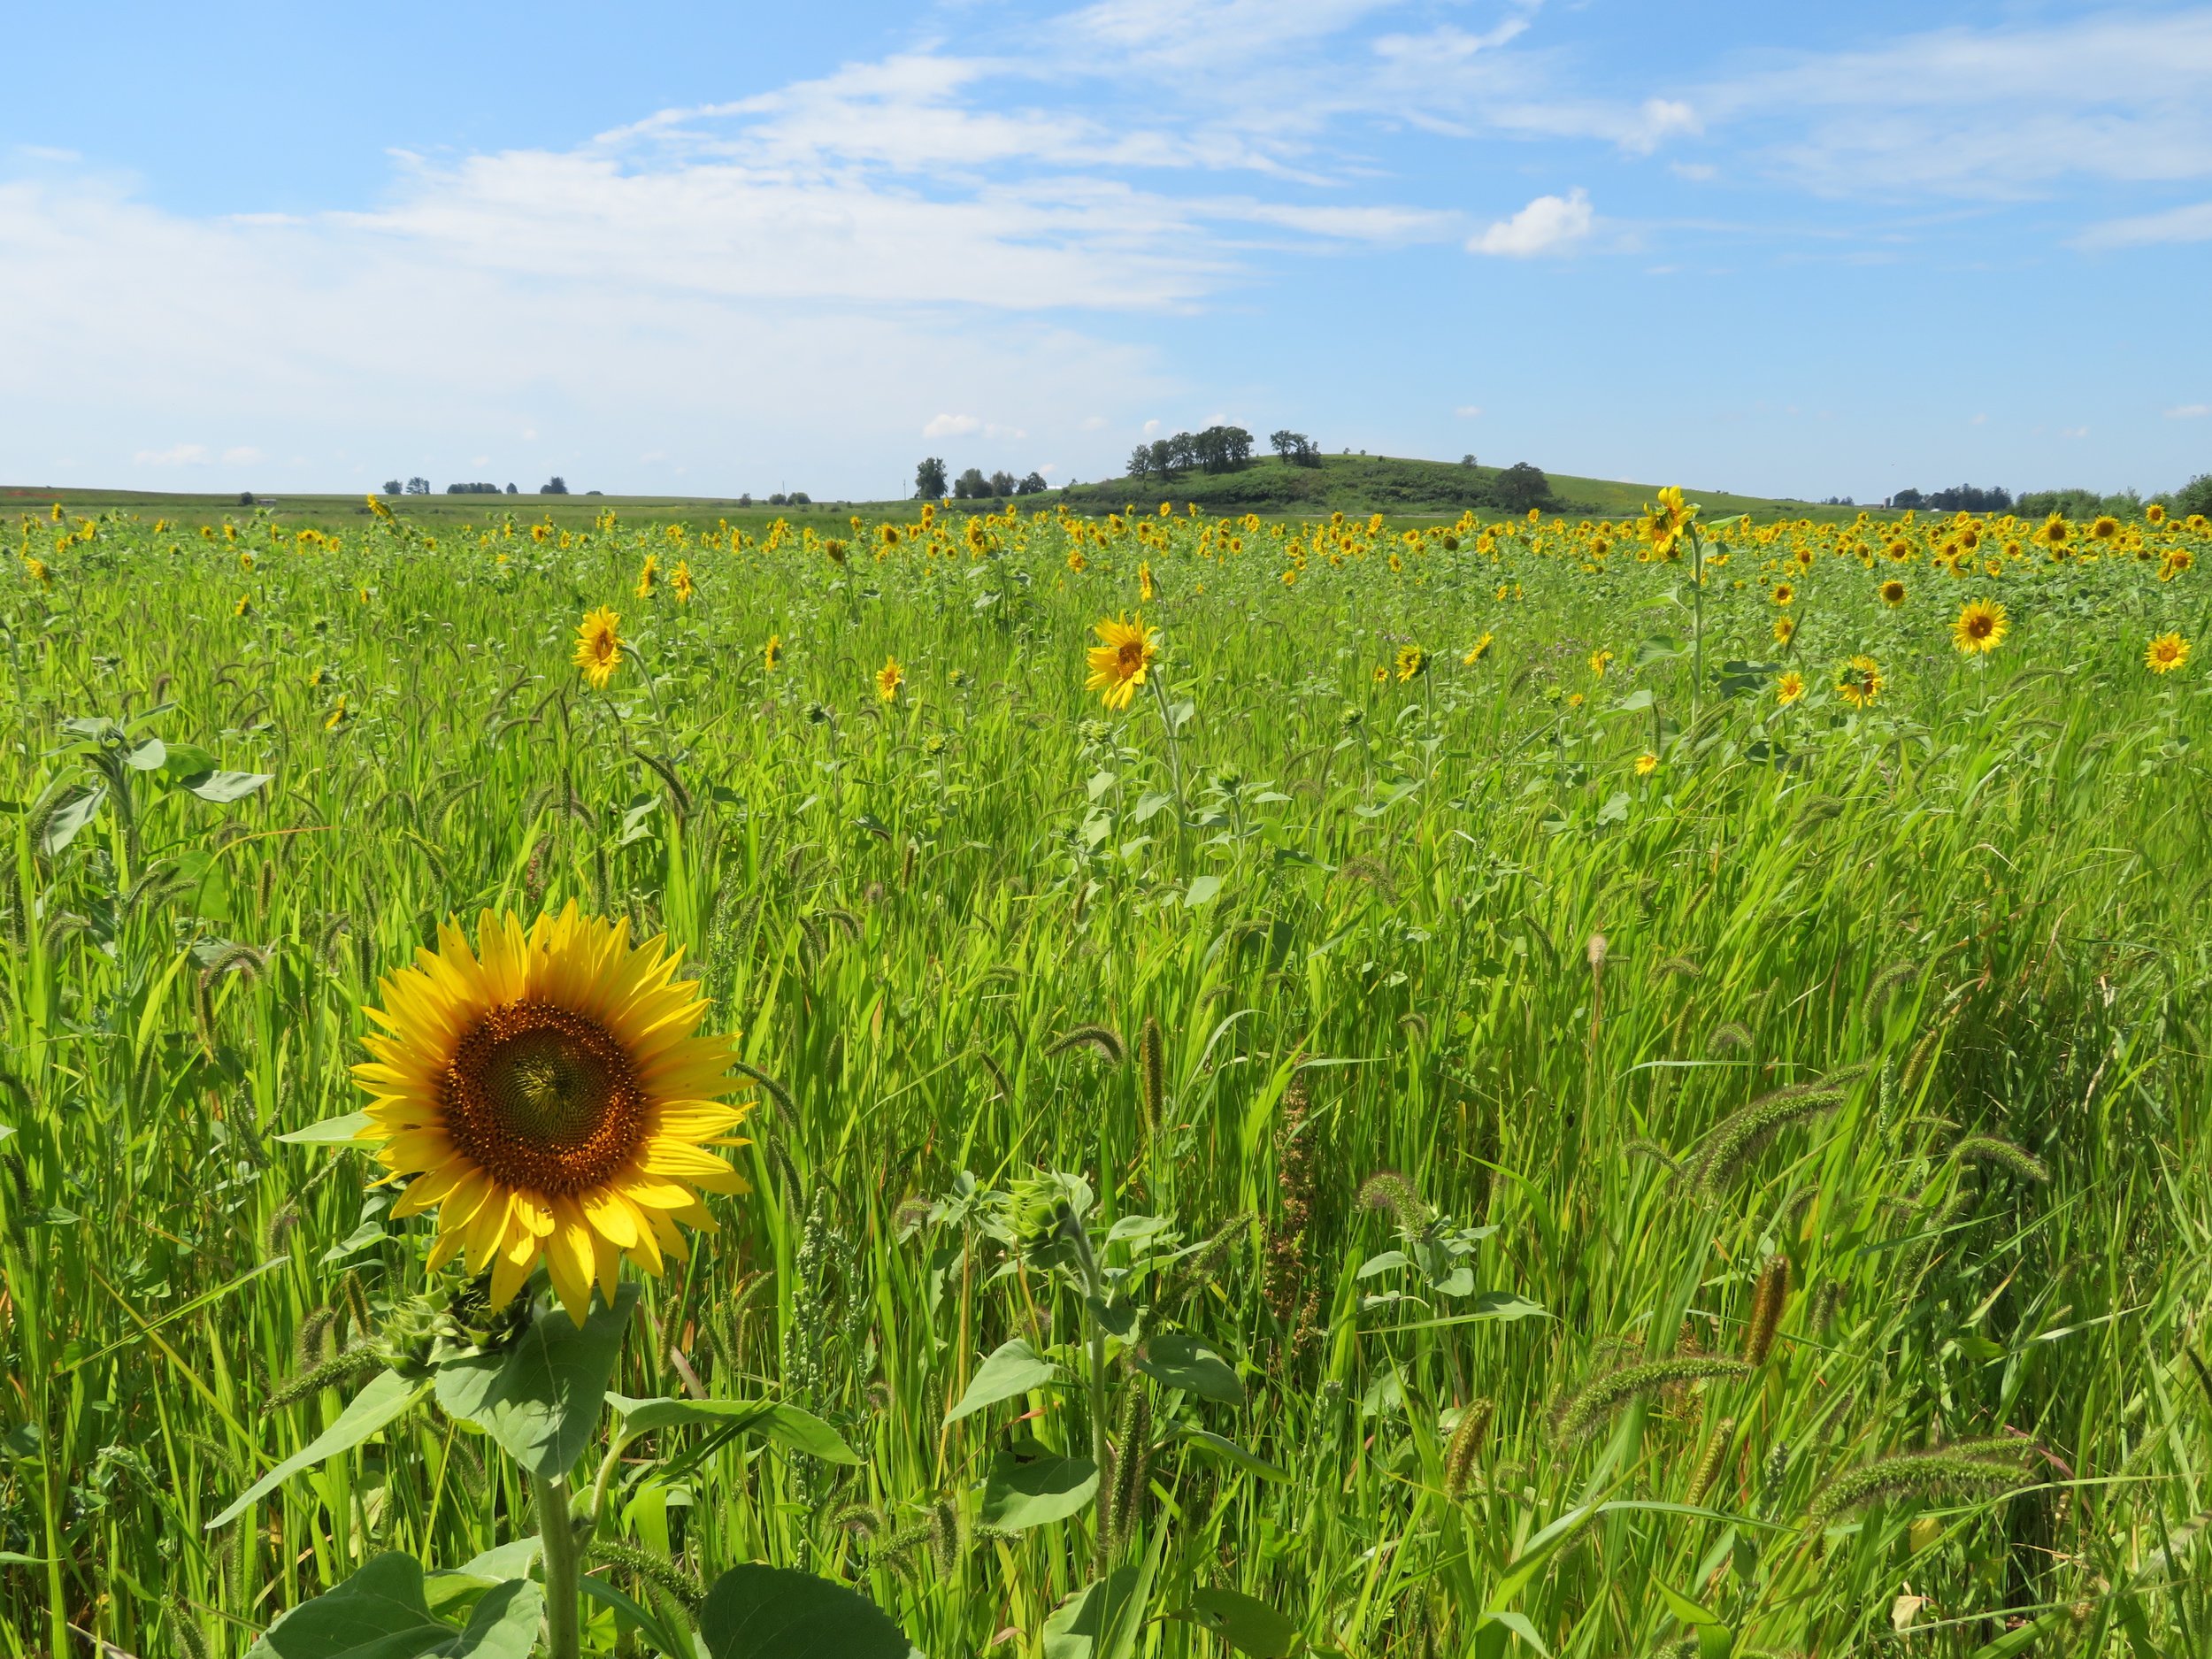   Sunflowers galore at the Goose Pond Sanctuary food plot. Photo by Maddie Dumas    